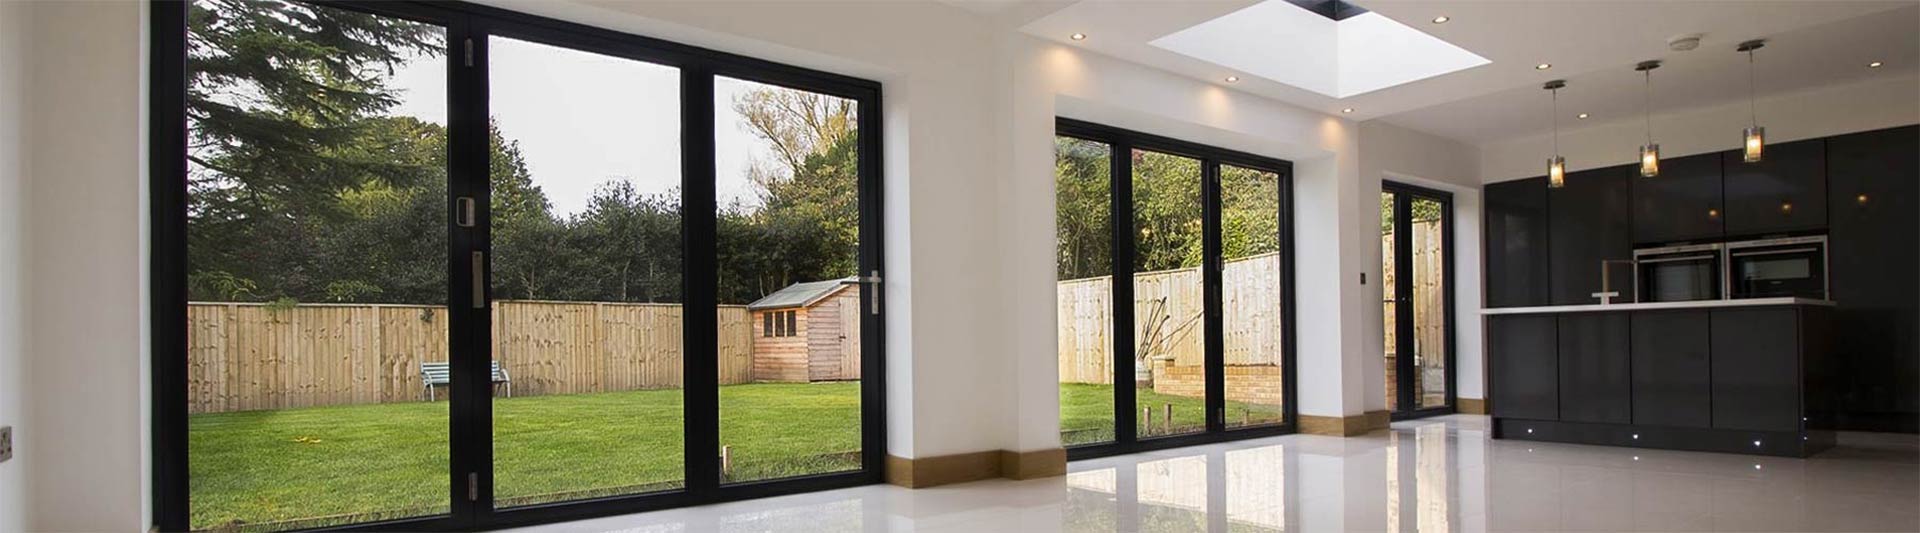 Installation of three sets of bifold doors to complete this multi use space in a new build home, Heswall.